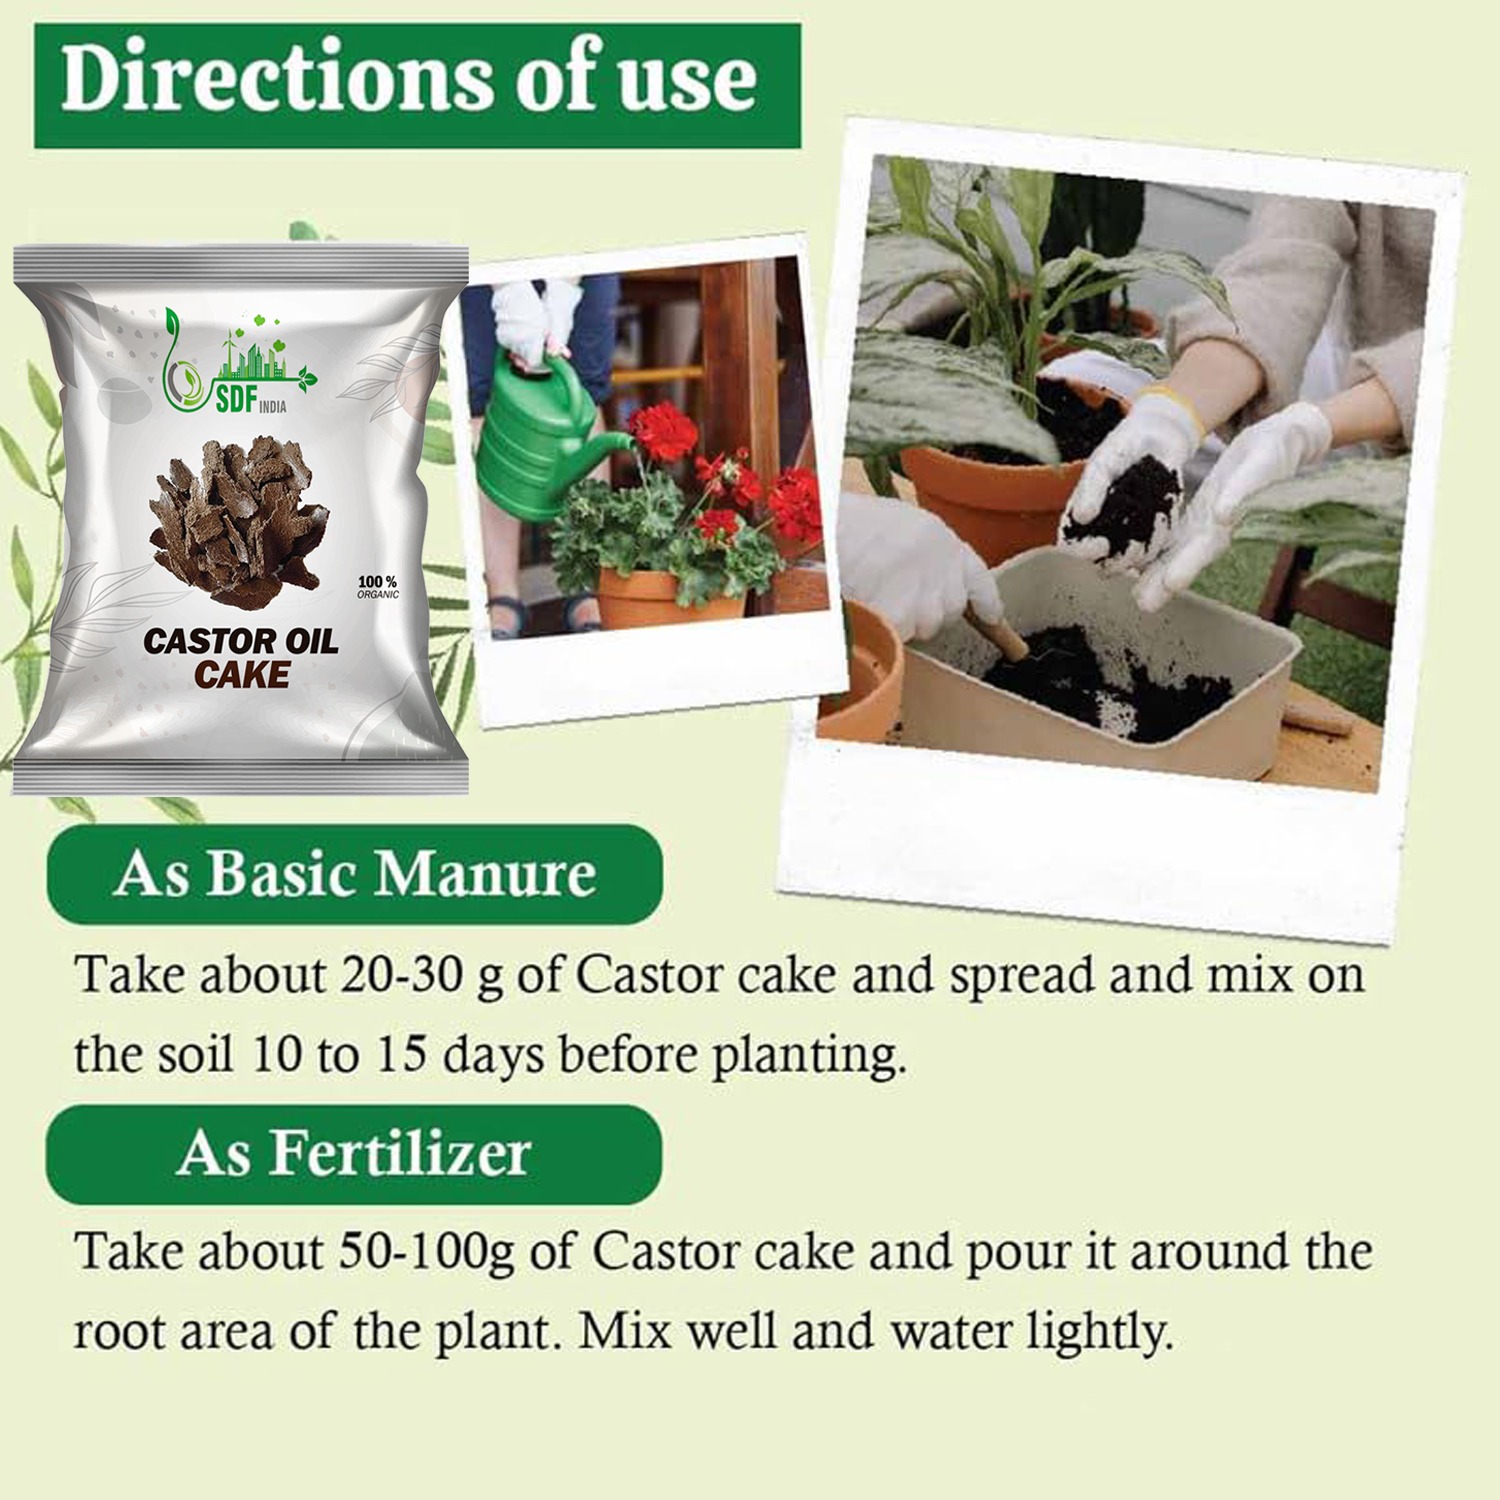 6090  SDF India Castor Oil Seed Cake Powder | 100% Natural, Organic NPK Fertilizers | Micronutrients for Plants | Home & Terrace Gardening | Boosts Plant Growth & Pest Repellent (1Kg) (SDFindia1kgCC)(6090_Castor cake_1kg)